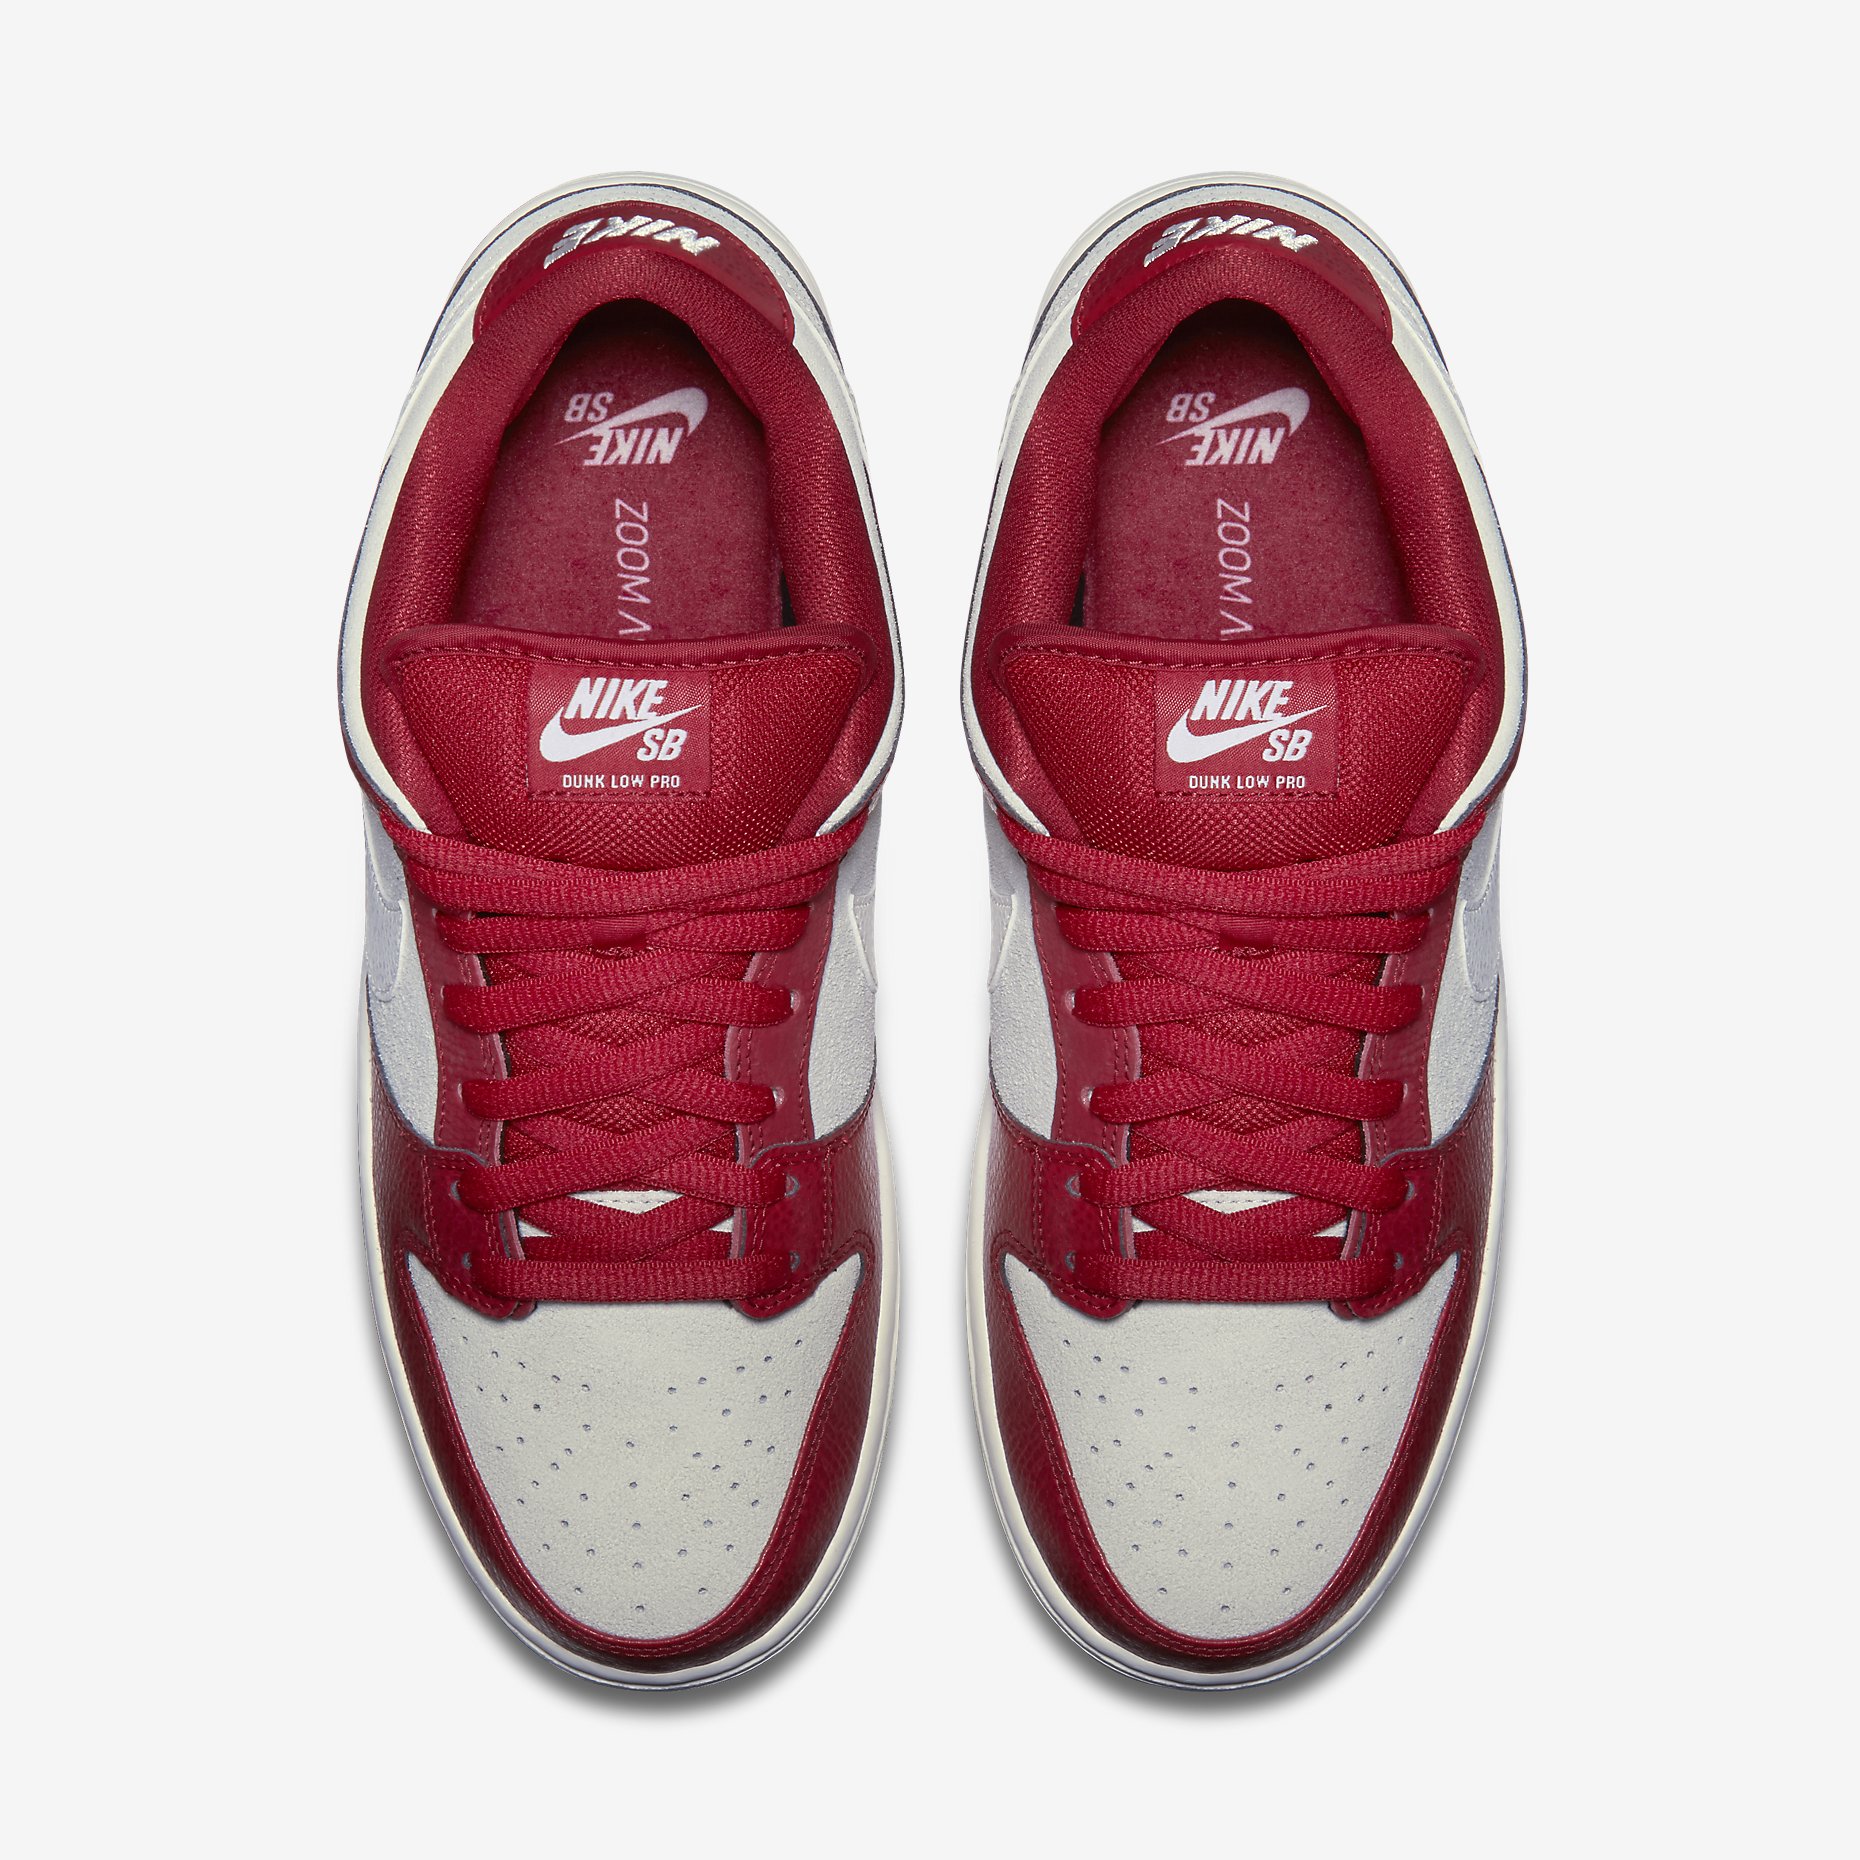 Two Nike Dunk Low SB Colorways on Clearance at Nike - Air 23 - Air ...